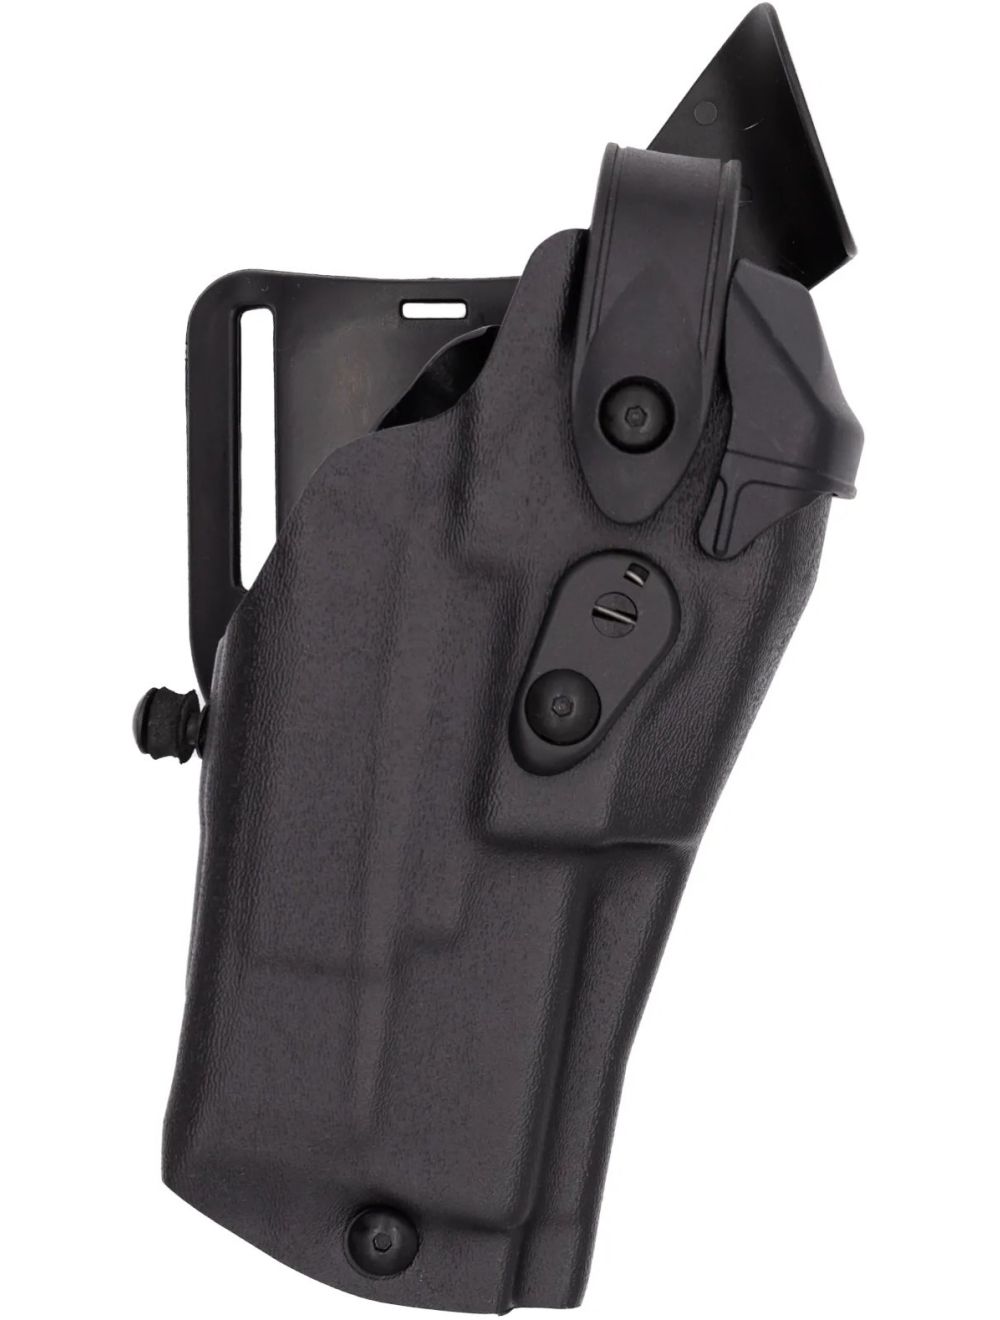 Model 6360RDS ALS/SLS Mid-Ride, Level III Retention Duty Holster for FN 509 w/ Compact Light